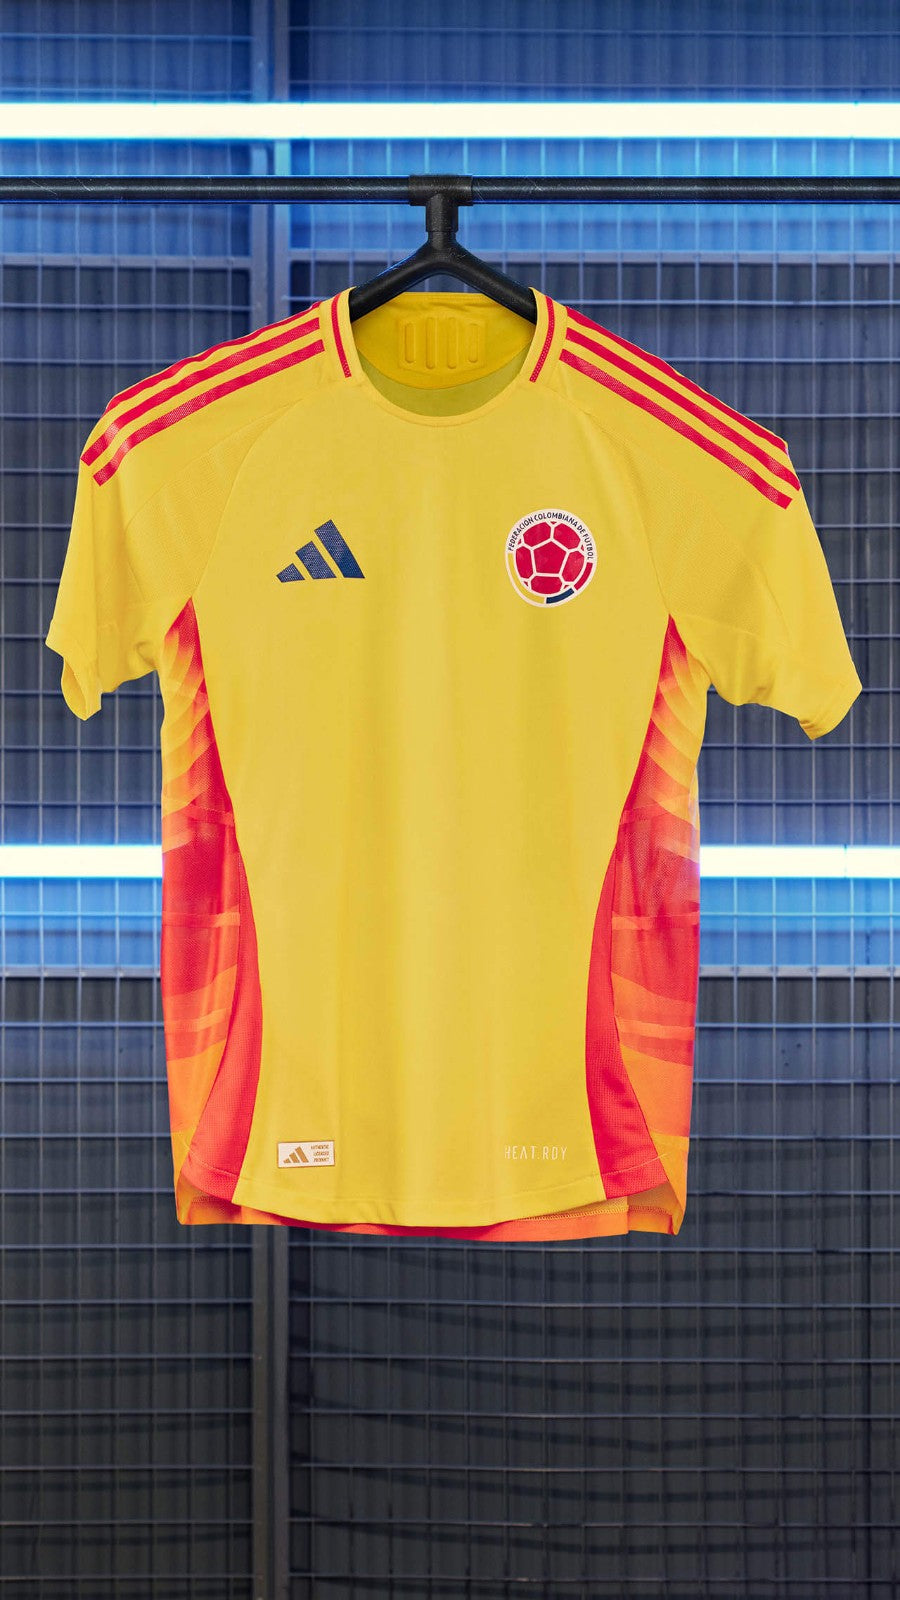 COLOMBIA NATIONAL SOCCER TEAM JERSEYS 23/24